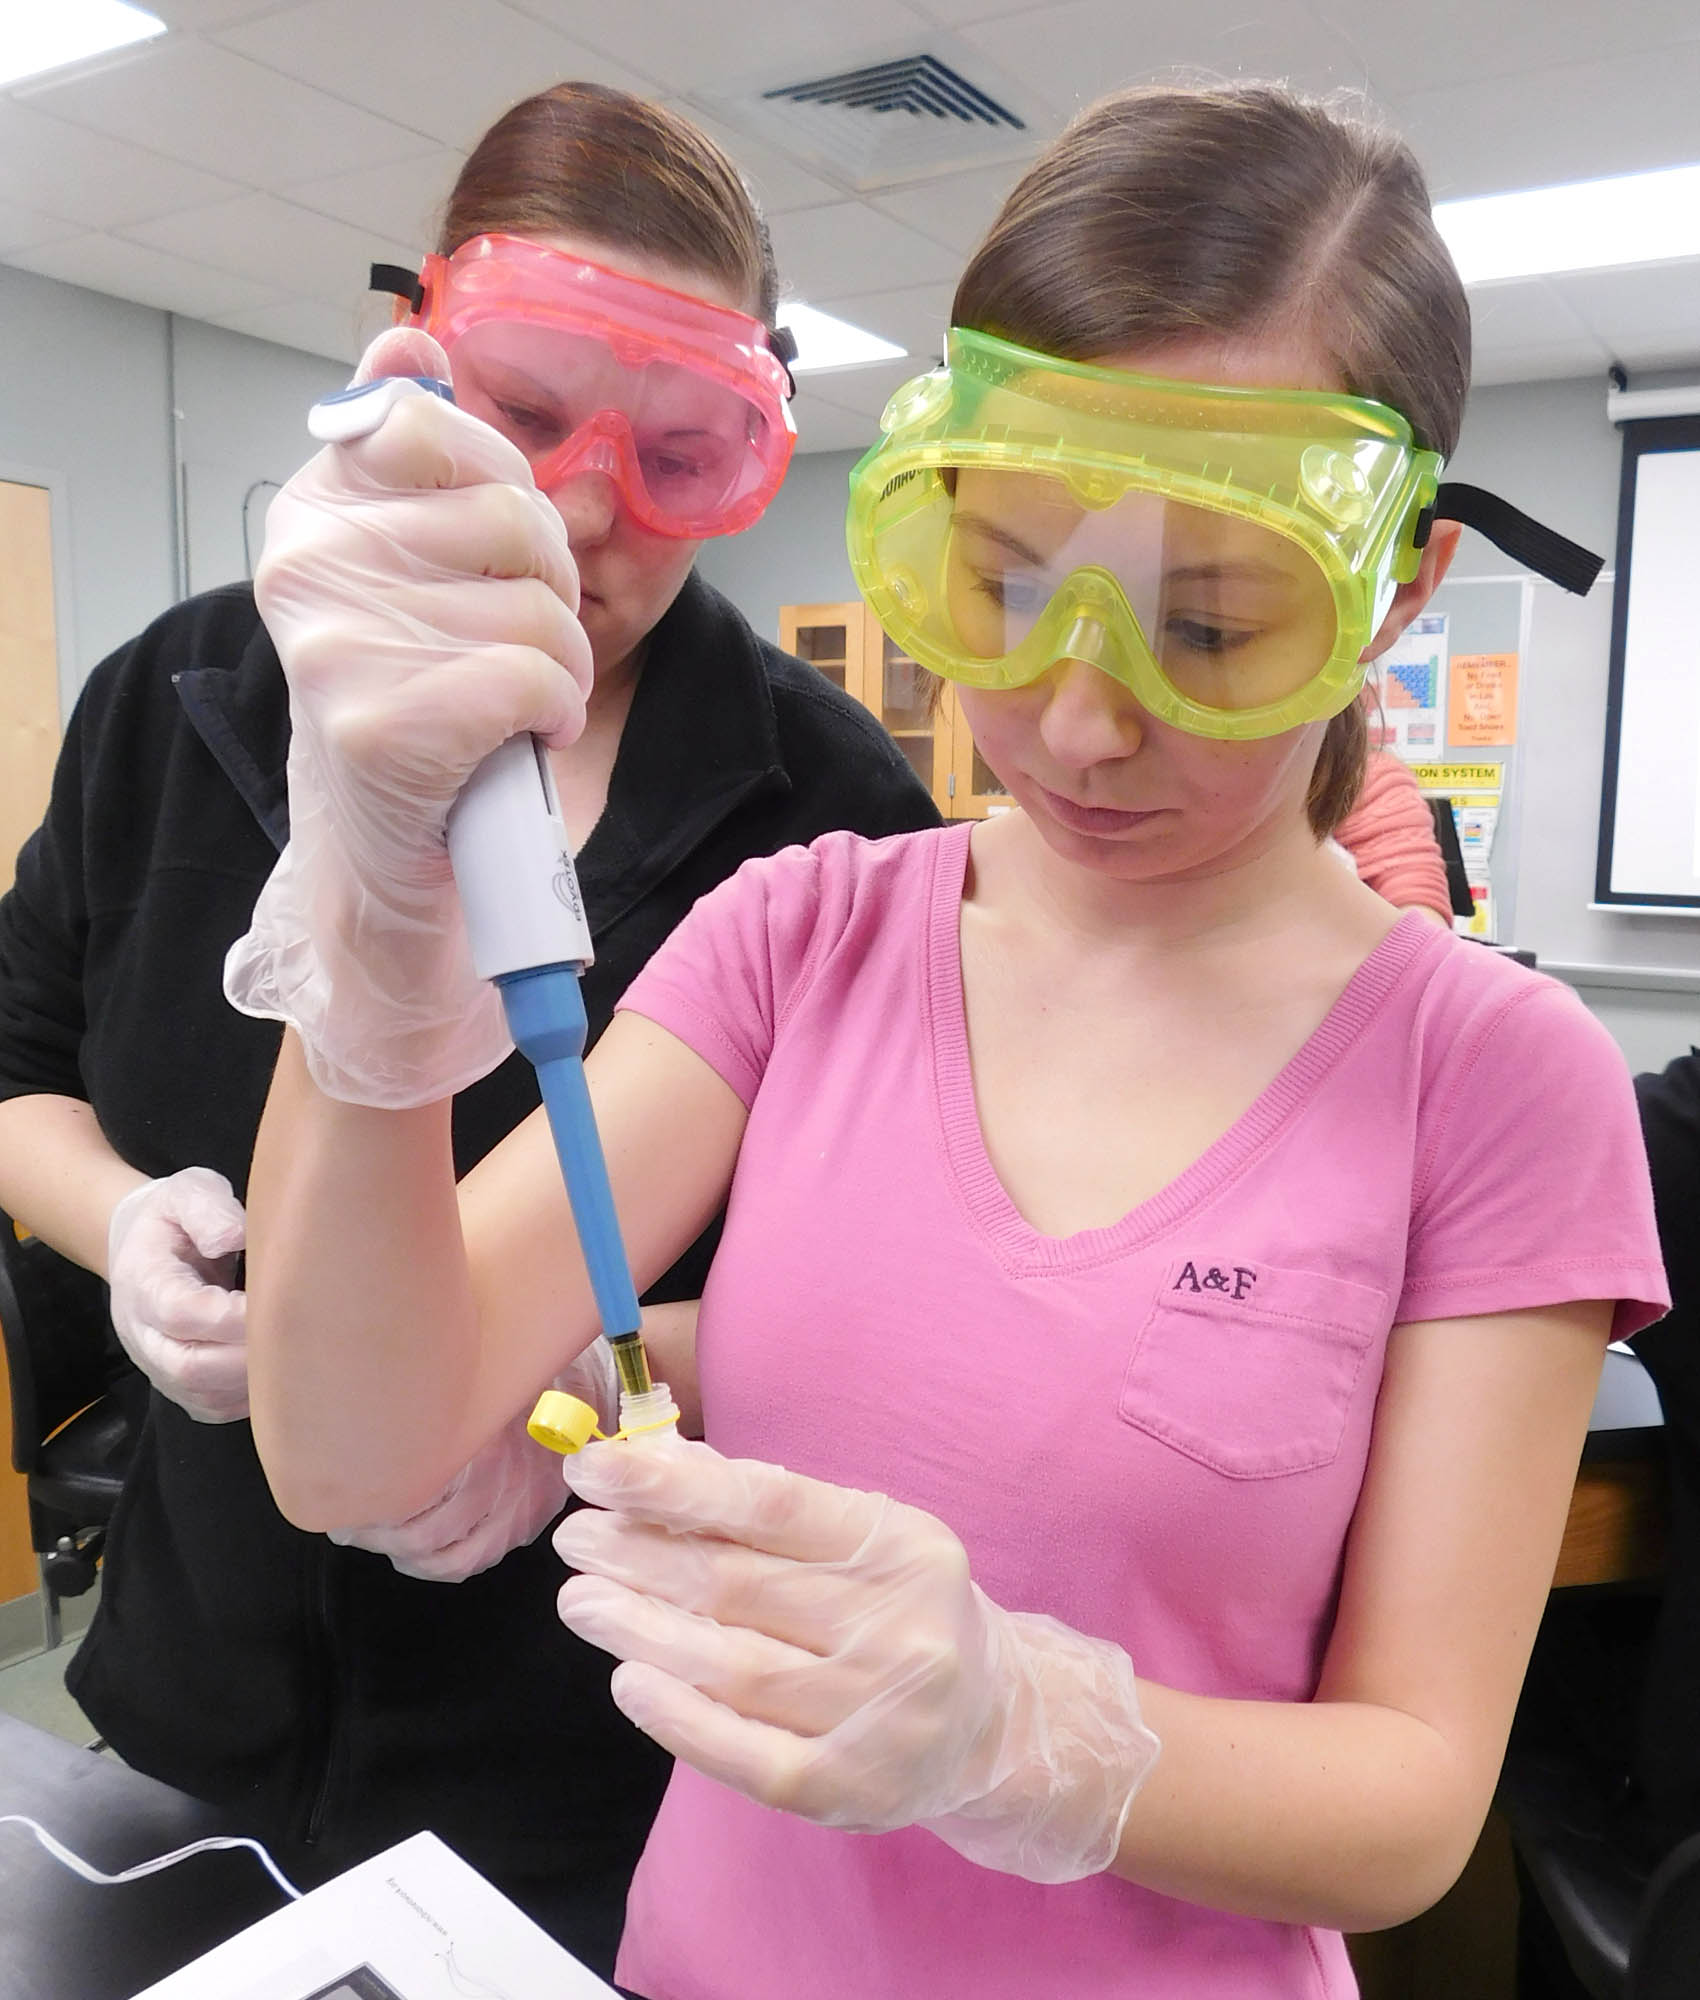 Click to enlarge,  Central Carolina Community College students in the Criminal Justice class "Forensic Biology" study DNA thanks to a lab exercise provided by the NC BioNetwork program. Pictured are students Brittany McLamb (yellow goggles) of Coats and Jonetta Bates (pink goggles) of Harnett County. The BioNetwork says of the lab exercise: "In this course, students will help police investigators solve a crime mystery by matching forensic DNA samples to a missing person's genetic material. This lab introduces students to the essential molecular biology techniques of PCR (polymerase chain reaction) and DNA gel electrophoresis. It highlights real-world applications of molecular biology such as DNA analysis in personal identification, forensics and molecular medicine. This lab experience also illustrates the genetic underpinnings of disease through the cystic fibrosis transmembrane receptor gene." The CCCC Forensic Biology class is taught by Jessica Brown, Biology and Latent Evidence Instructor. For more information on Central Carolina Community College, visit the college website at www.cccc.edu. 